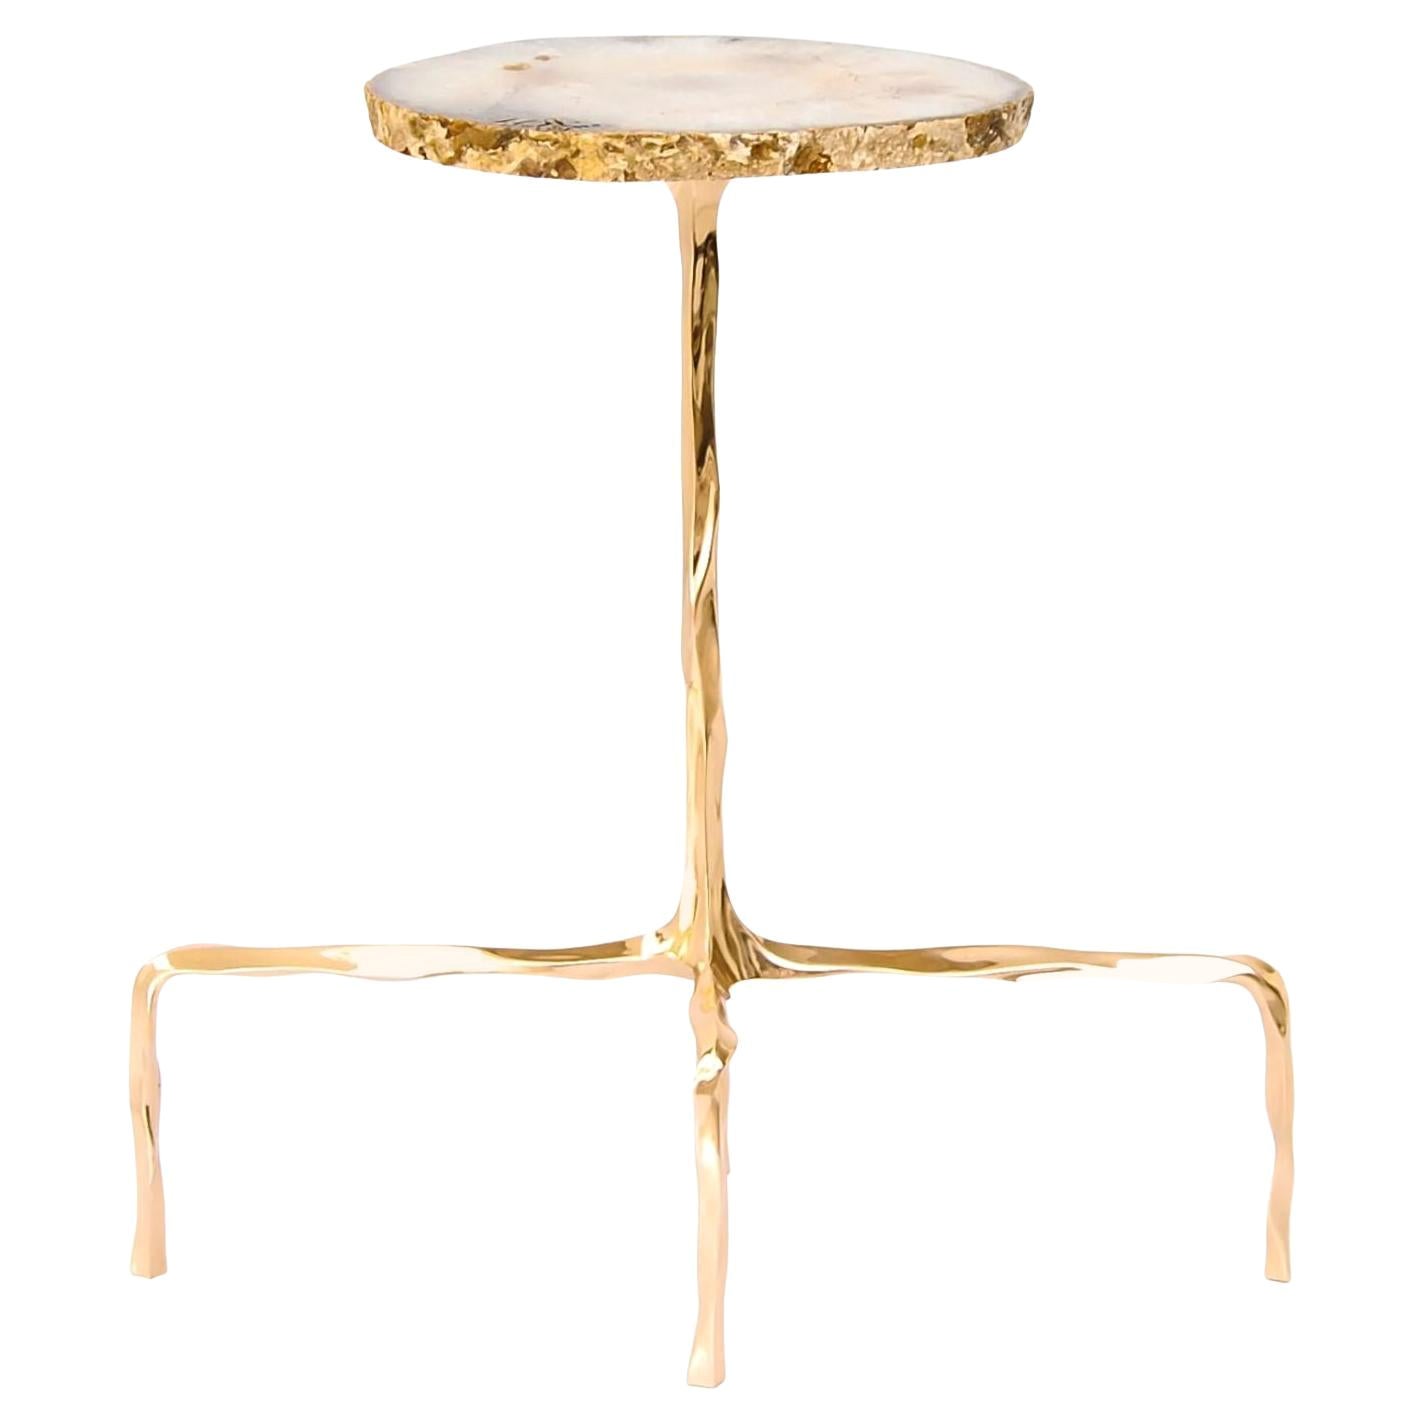 Presley Drink Table with Agate Top by Fakasaka Design